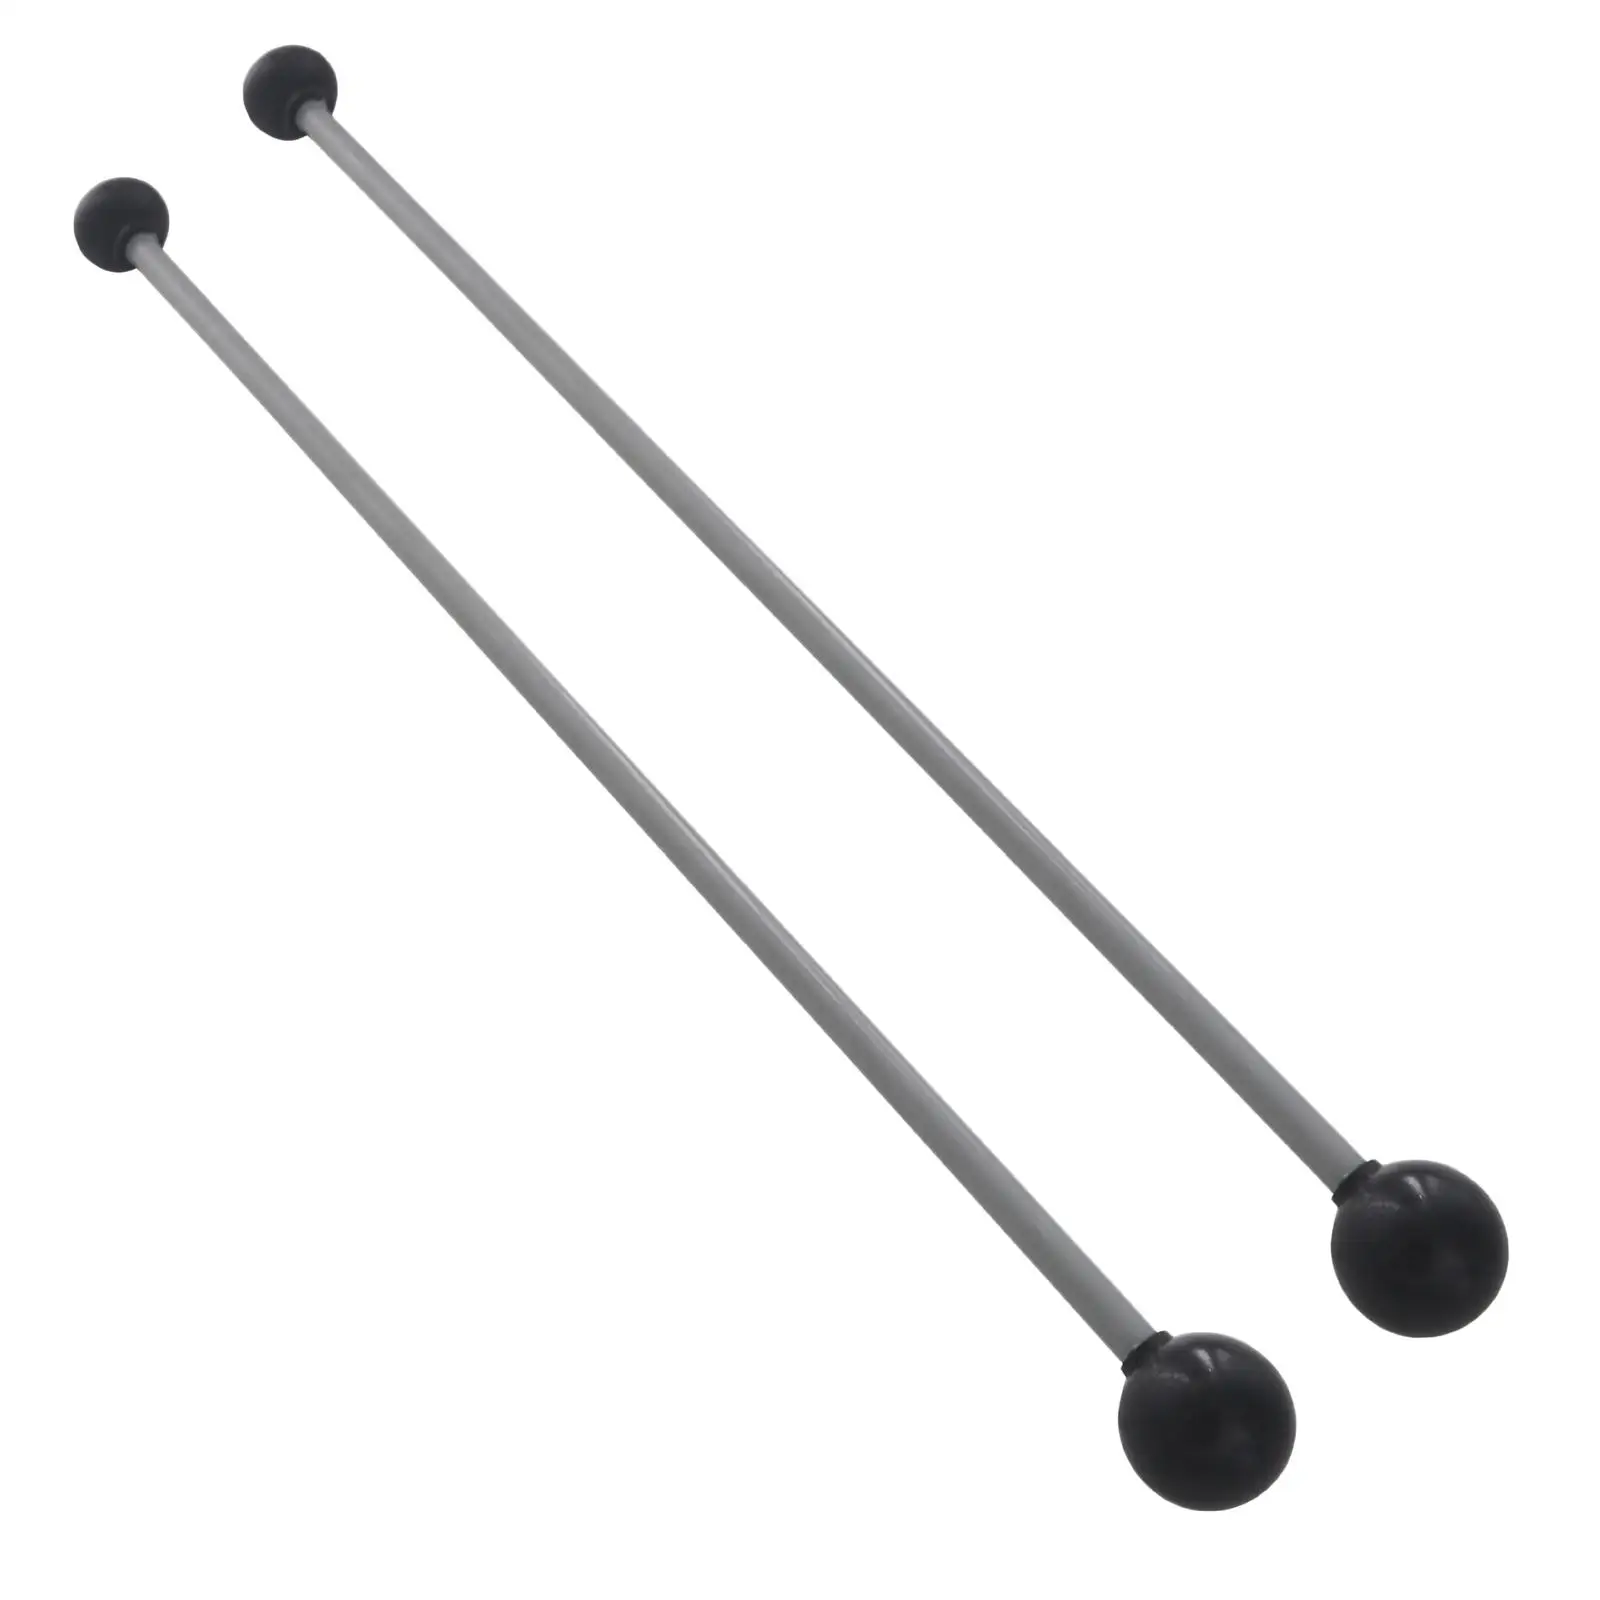 Marimba Mallets Instrument Accessory Durable for Hank Drum Beginners